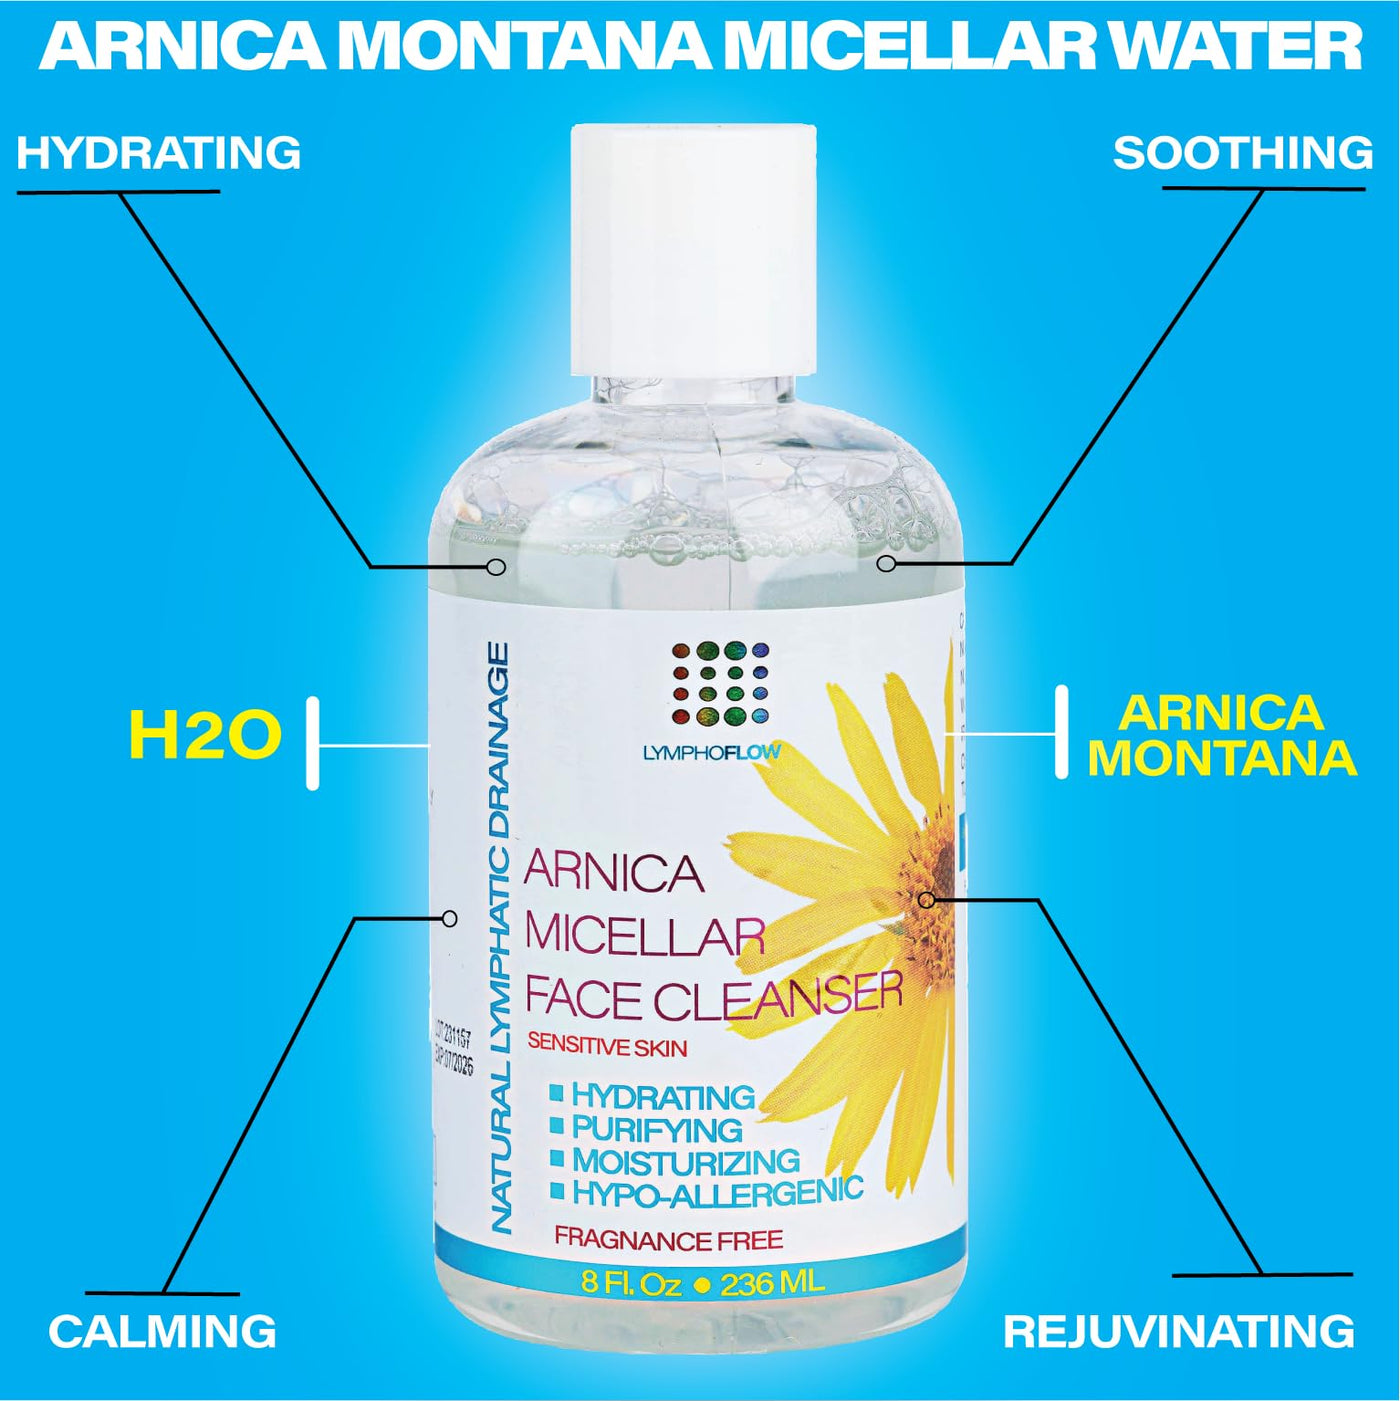 Bruizex Arnica Montana Micellar Cleansing Water for All Skin Types I Facial Cleanser & Makeup Remover I For Natural Lymphatic Drainage I Face Puffiness Reduction I Use with Pads, Face Mask I 8 Oz